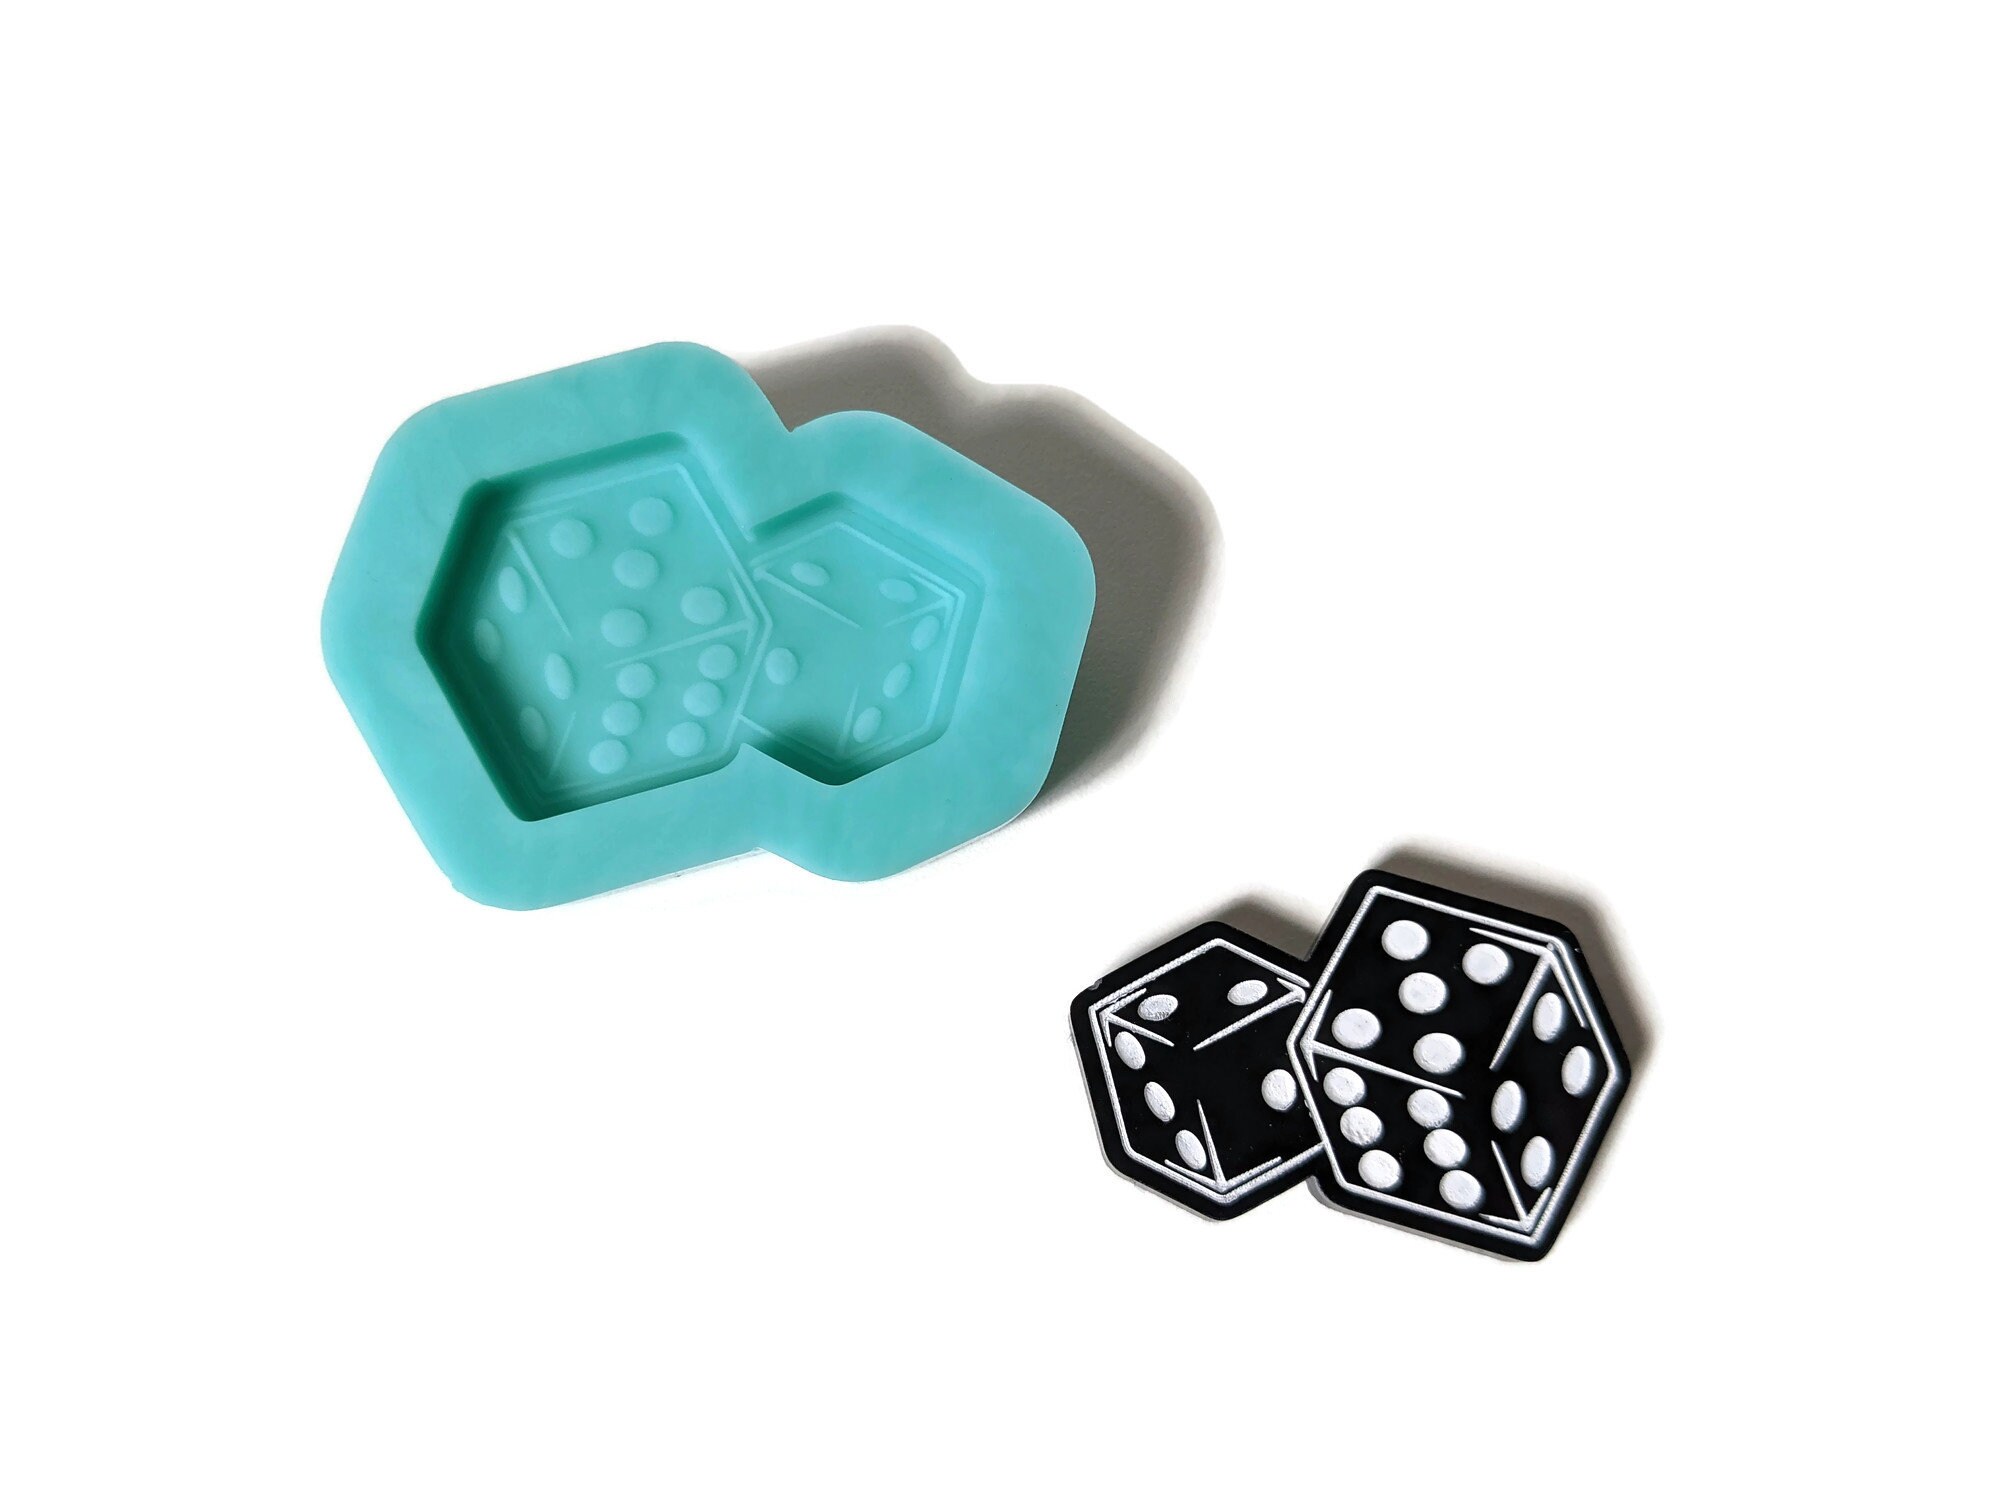 How to Make Cap / Squish Dice Molds 